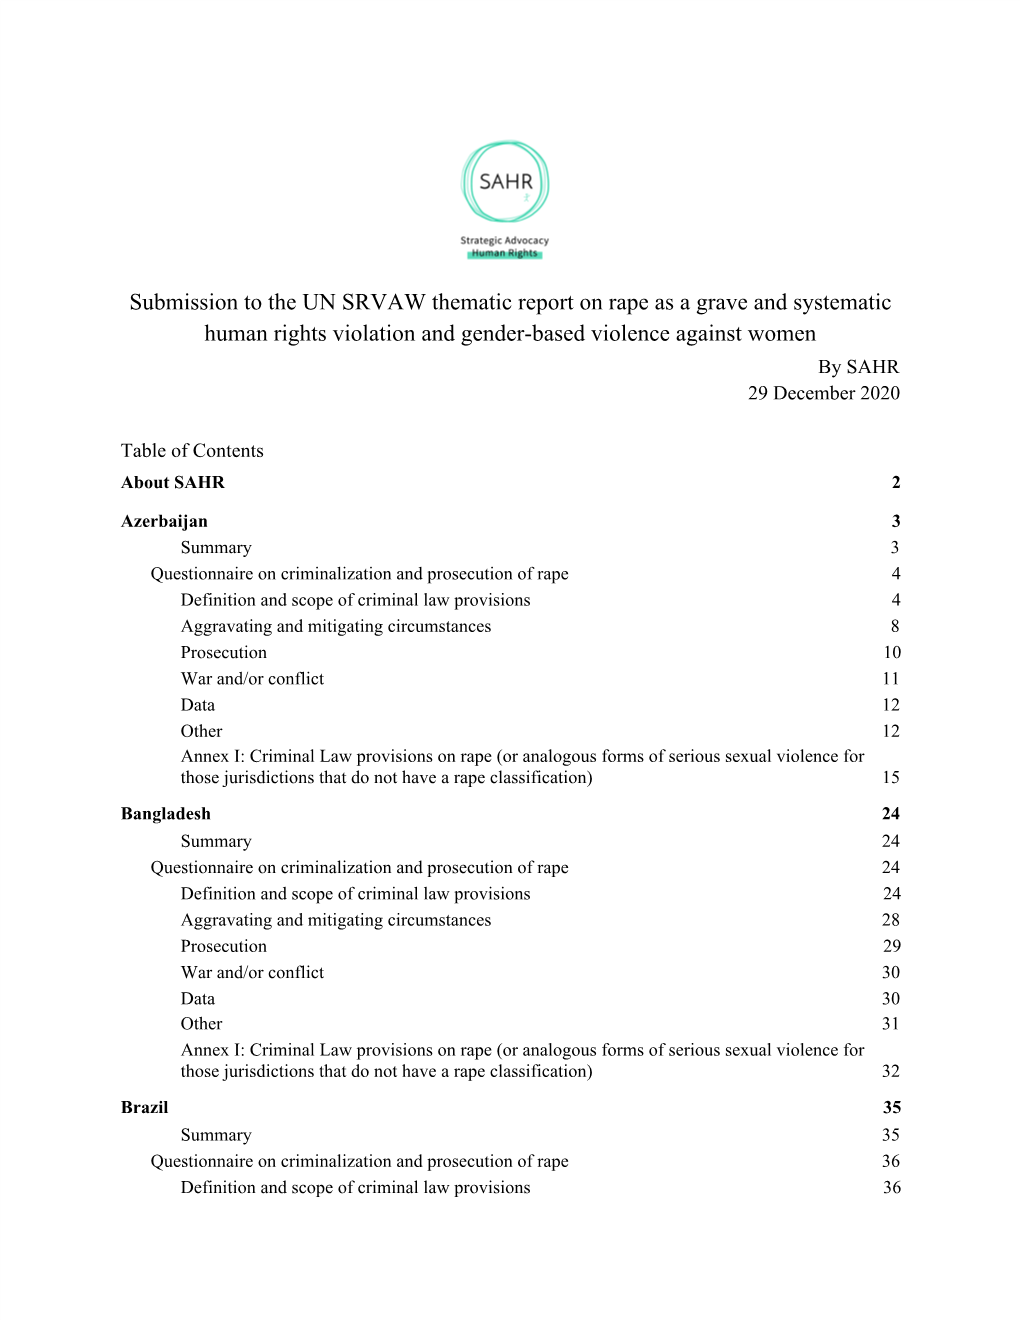 Submission to the UN SRVAW Thematic Report on Rape As a Grave and Systematic Human Rights Violation and Gender-Based Violence Against Women by SAHR 29 December 2020